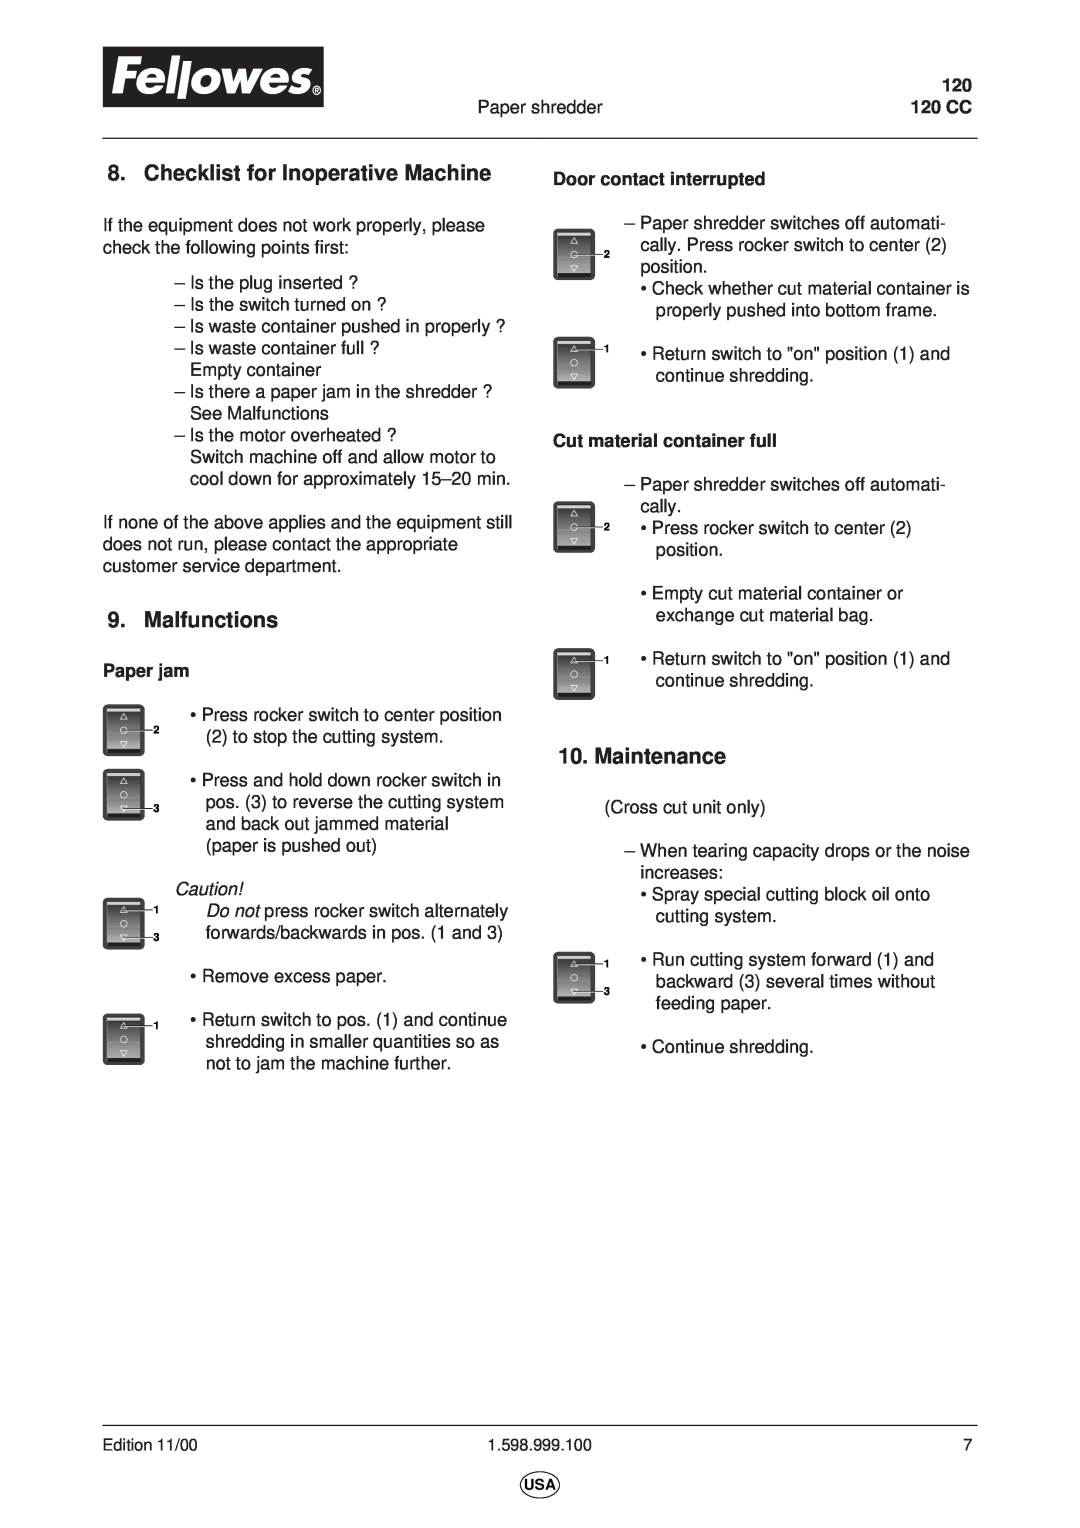 Fellowes Checklist for Inoperative Machine, Malfunctions, Maintenance, Paper shredder, 120 CC, Door contact interrupted 